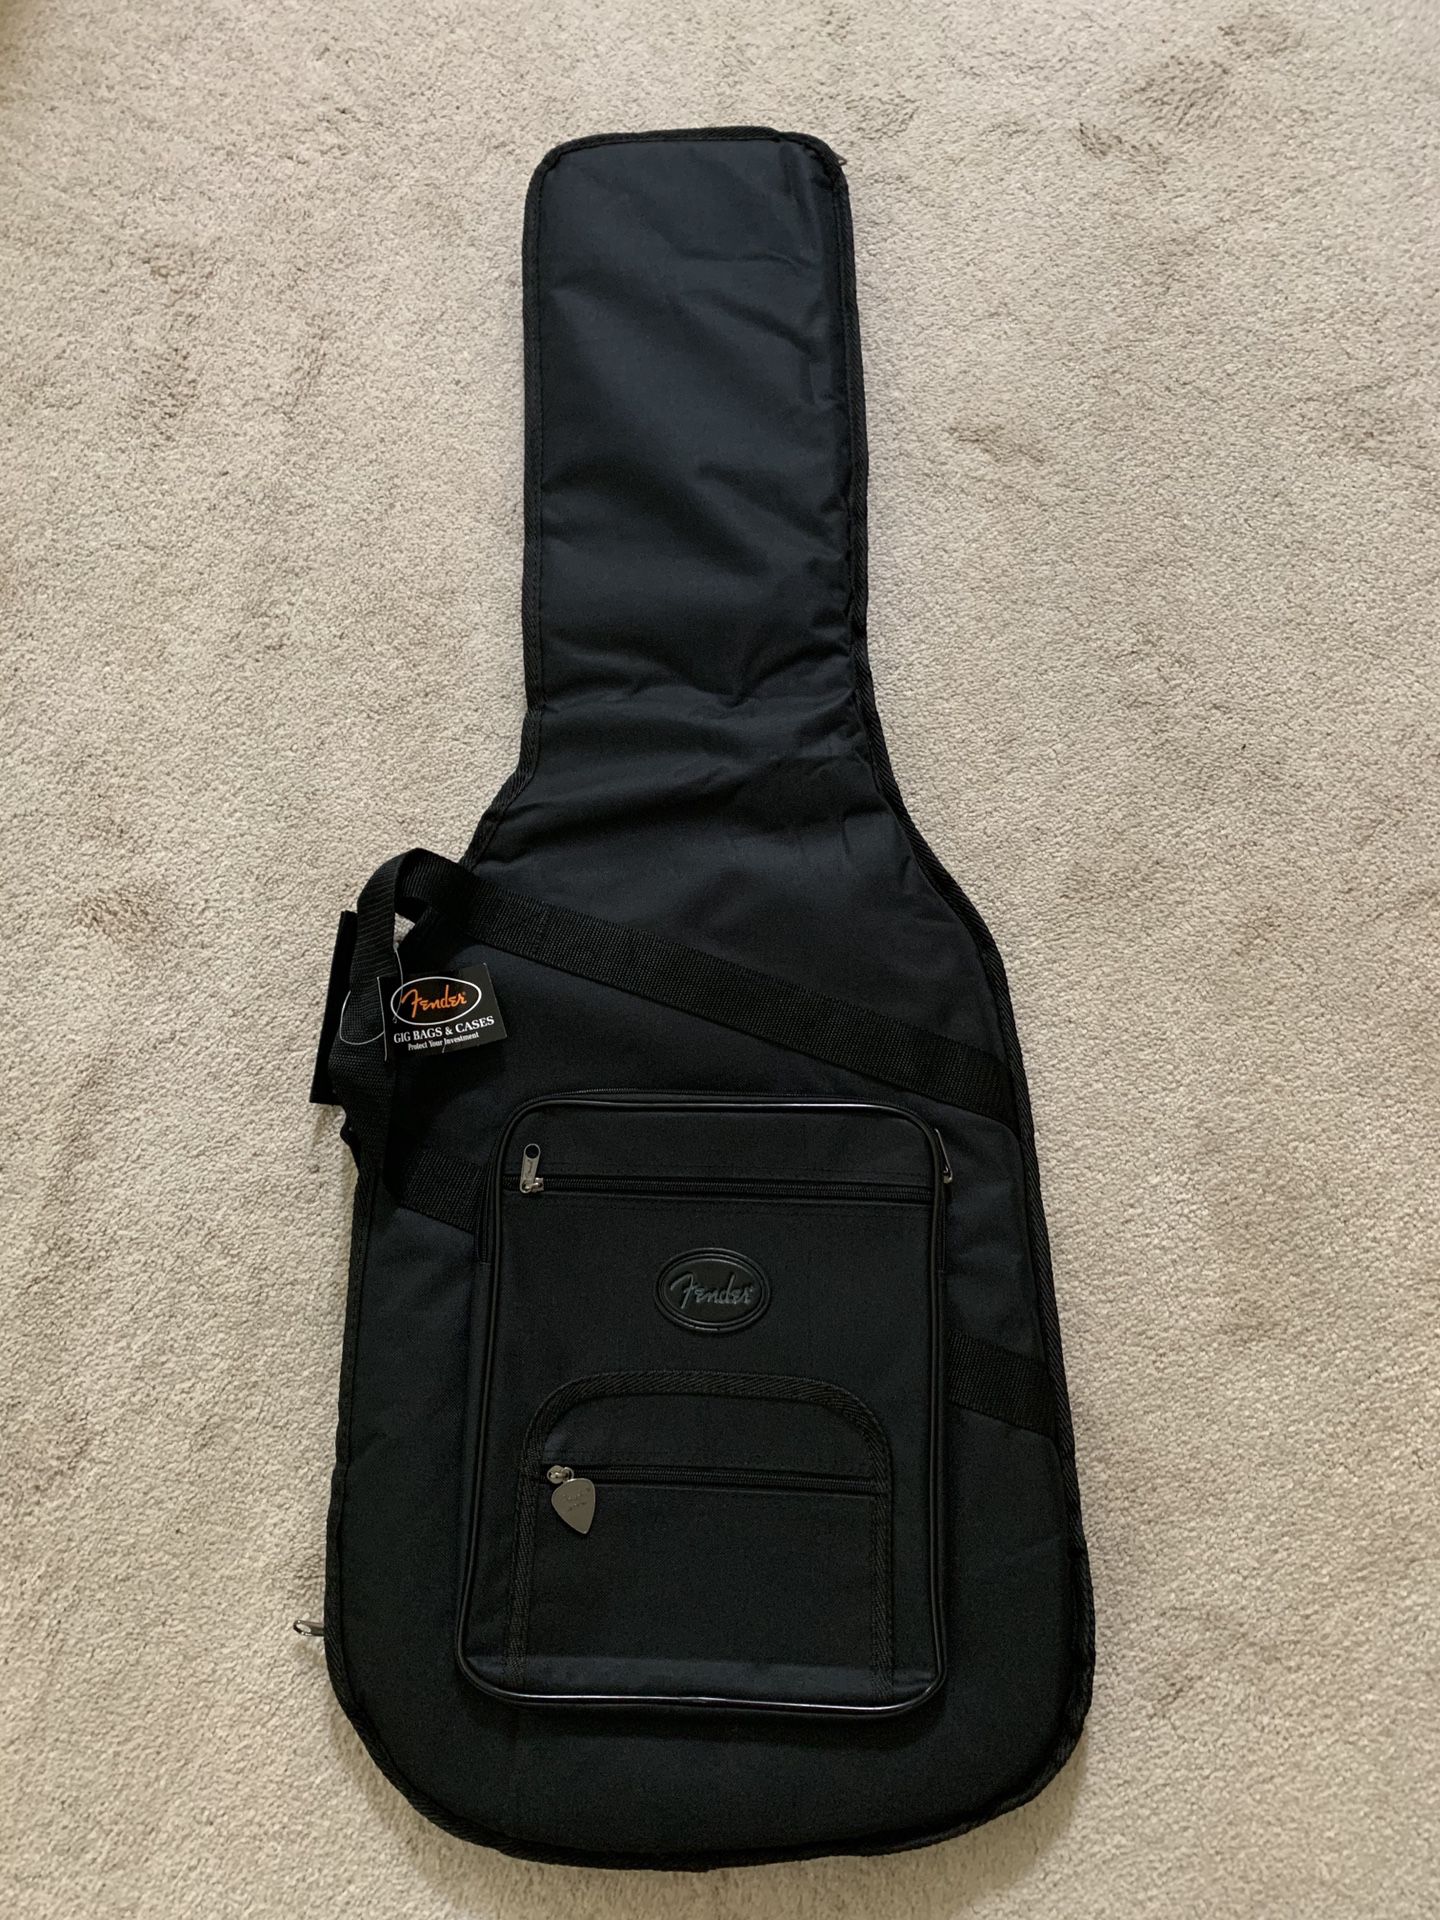 FENDER ELECTRIC GUITAR SOFT PADDED GIG BAG CARRY CASE BLACK - New With Tags